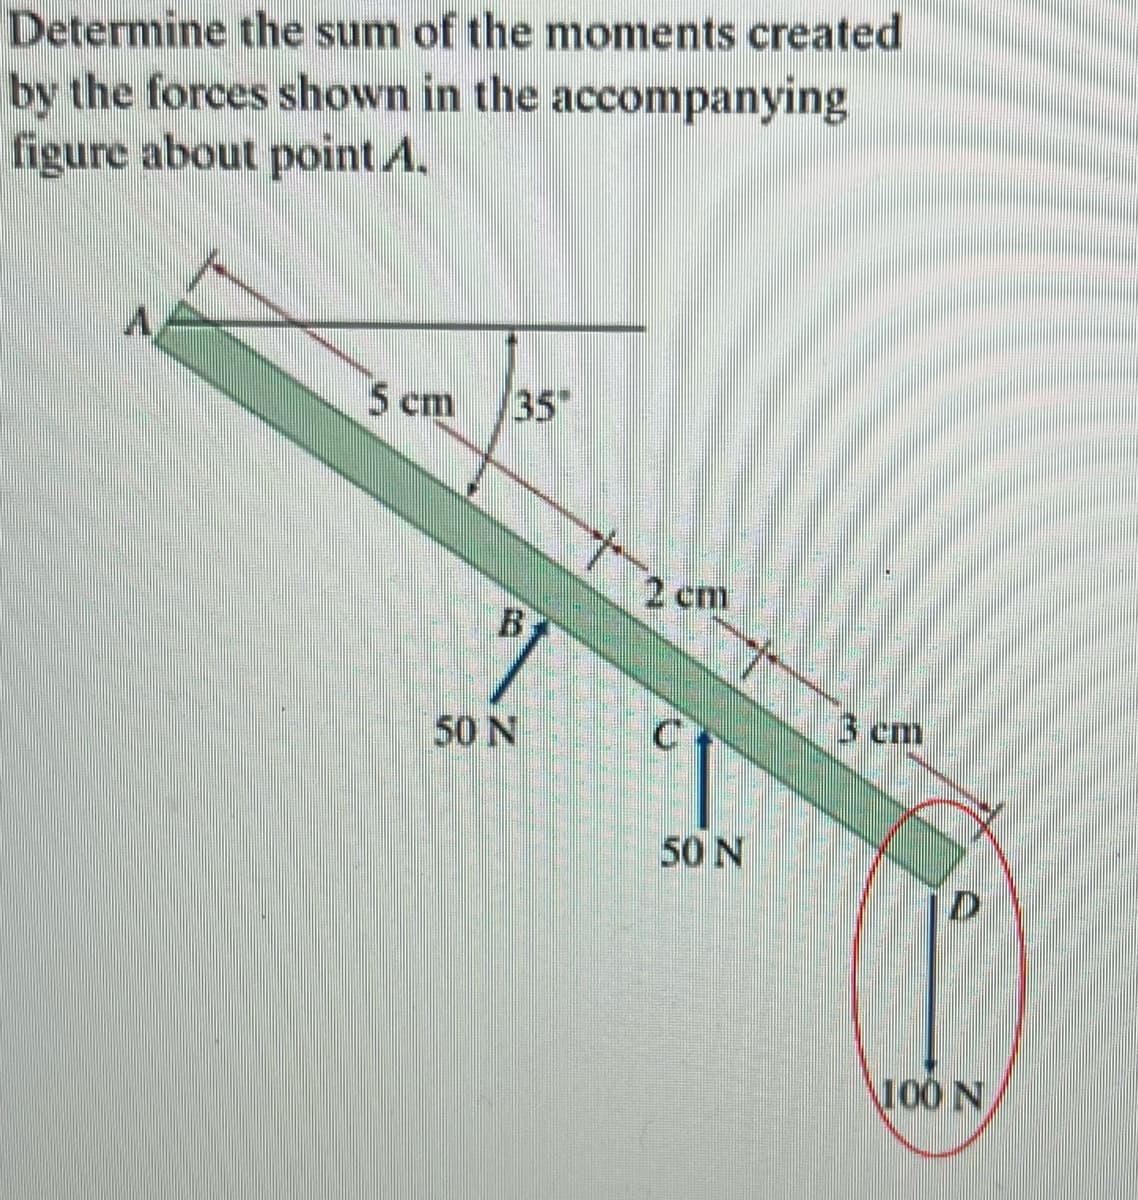 Determine the sum of the moments created
by the forces shown in the
figure about point A.
accompanying
5 cm
35"
B
50 N
2 cm
C
50 N
3 cm
A
100 N